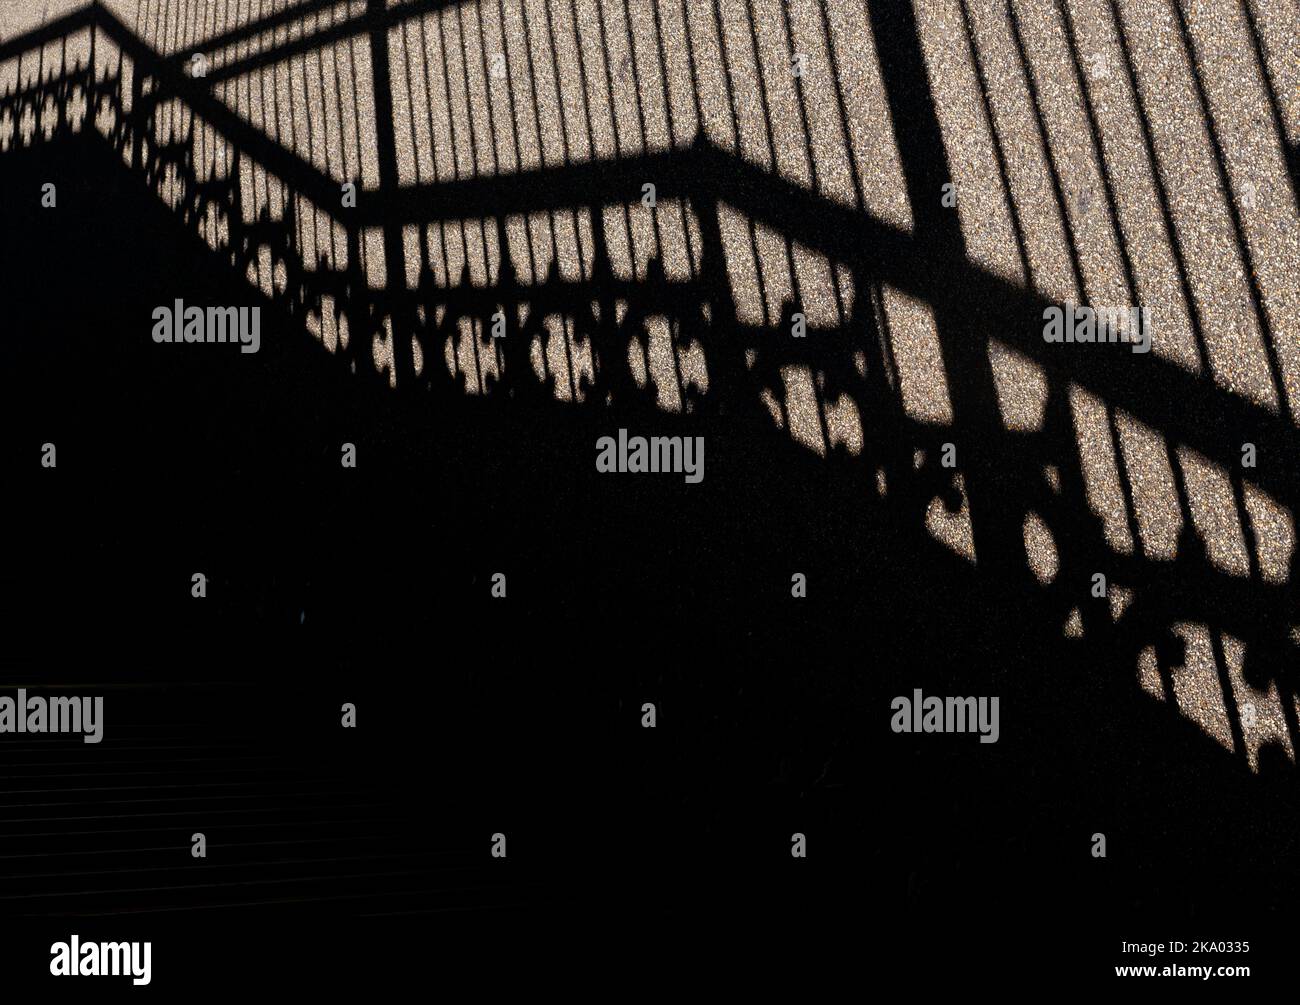 Shadows of staircase with ornate balustrades and railings. Stock Photo